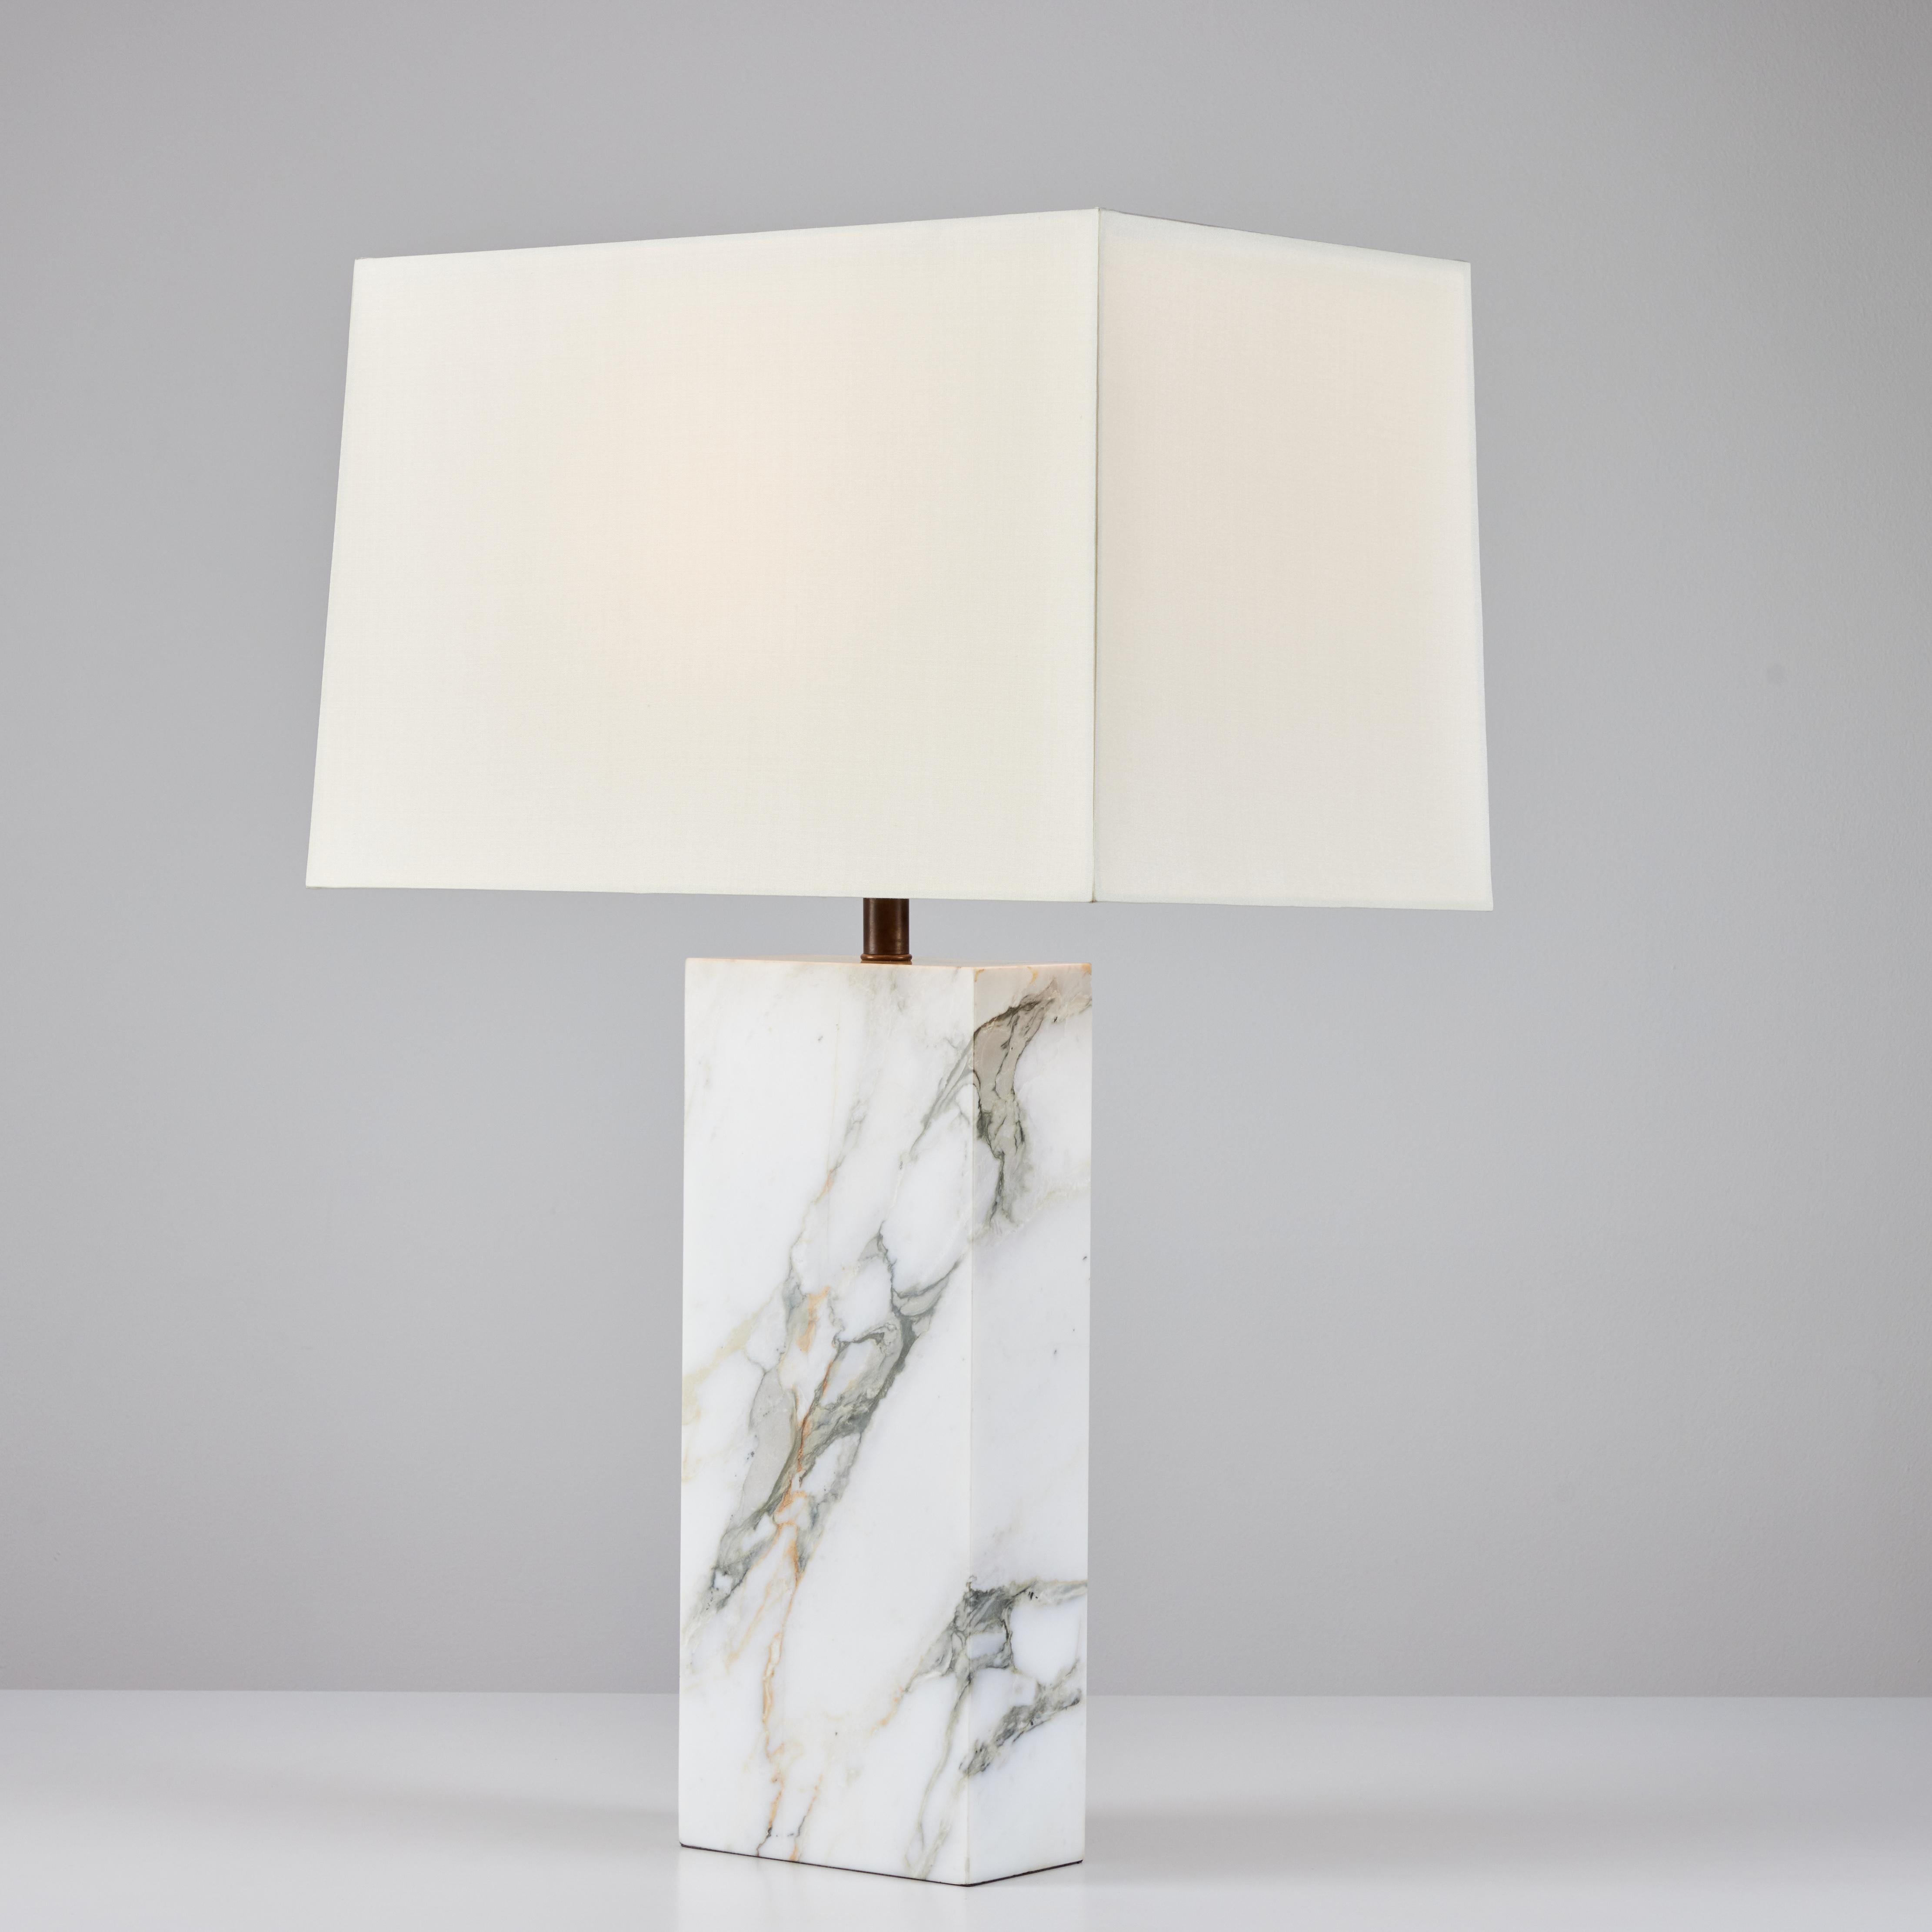 Table lamp with a rectangular carved marble base in the style of Robsjohn-Gibbings. The newly rewired; lamp features a new silk lamp shade. The shade and diffuser is secured by a patinated bronze finial.

Dimensions
7